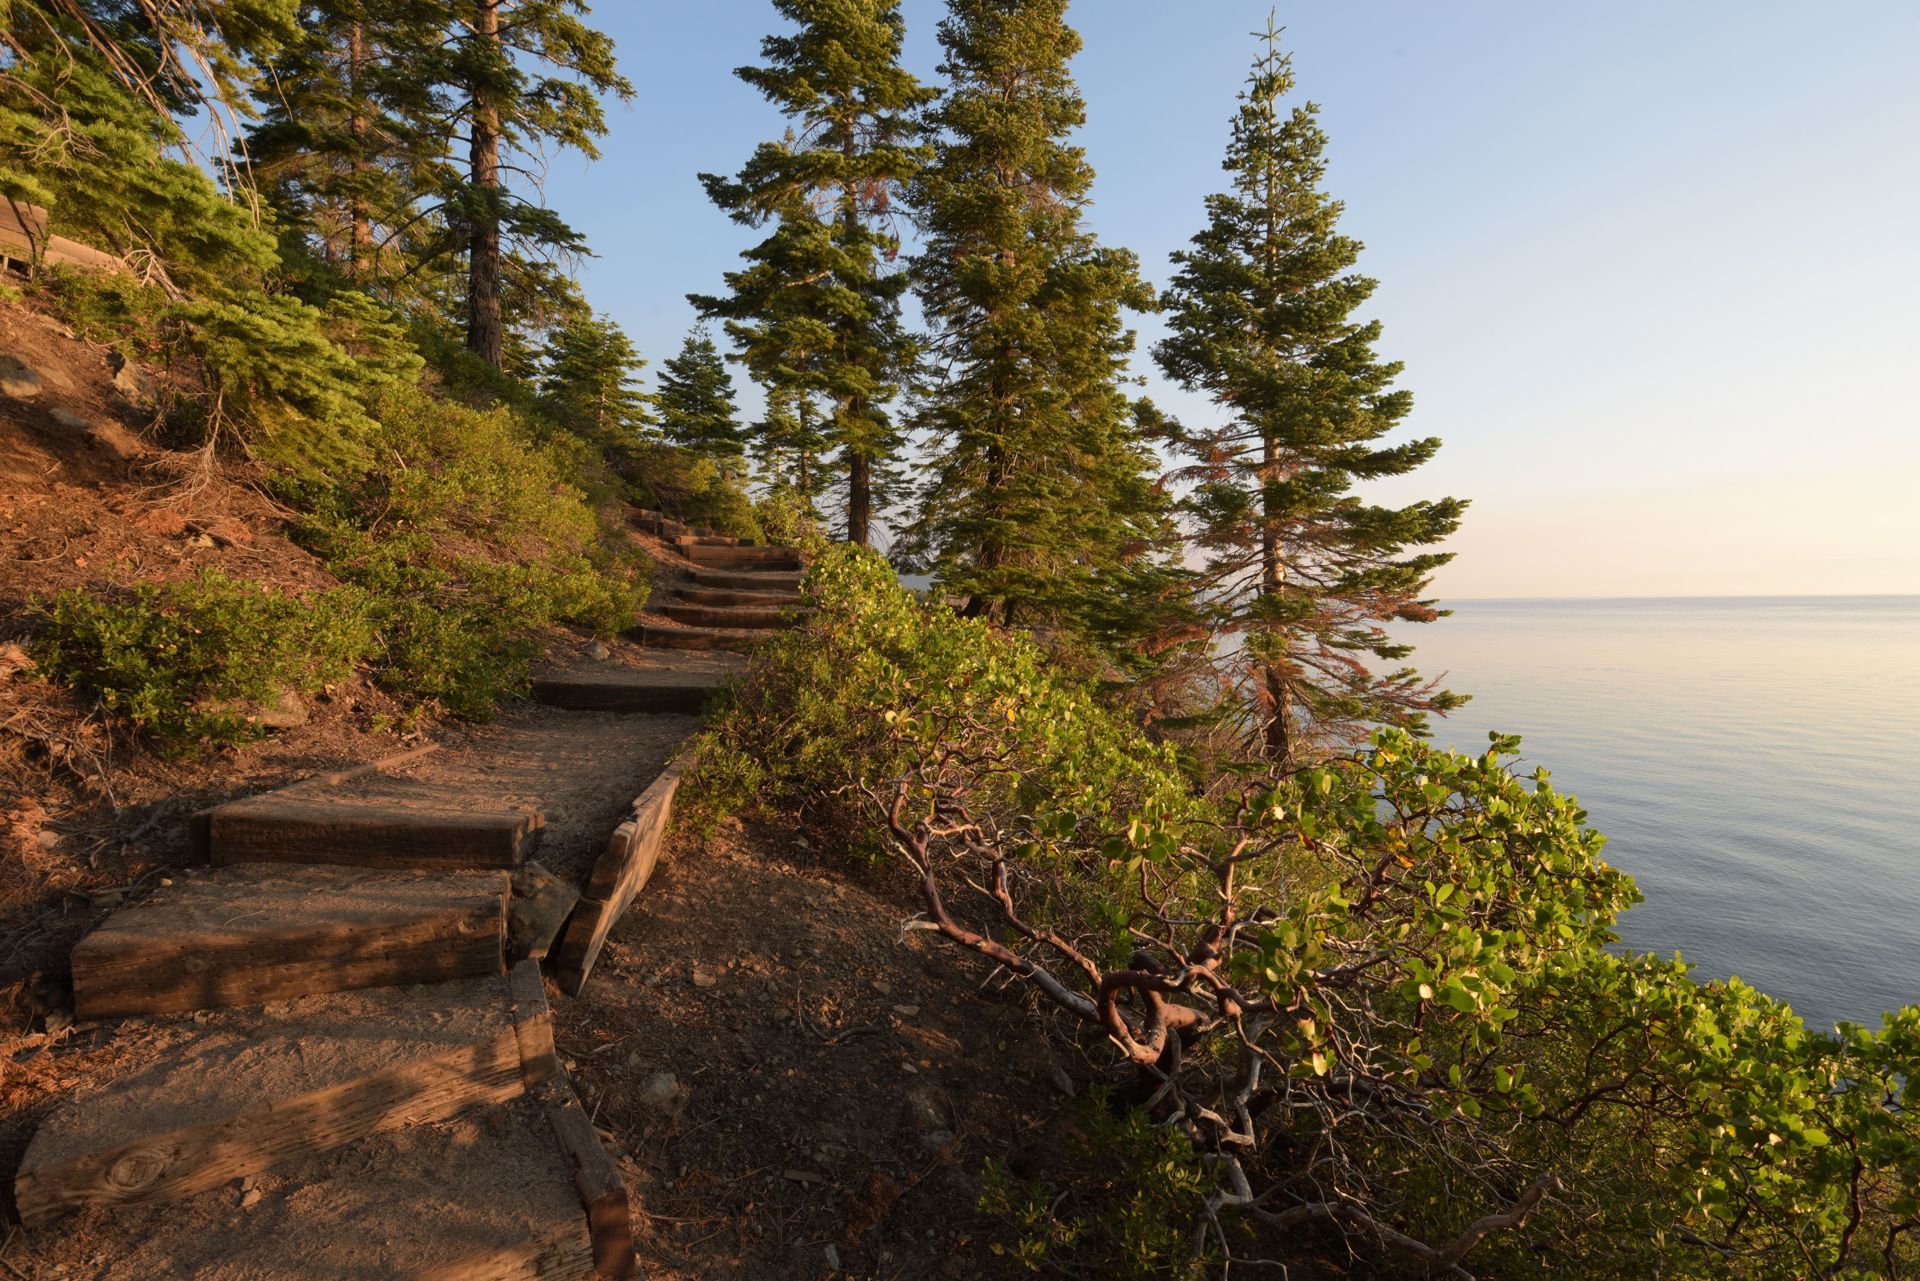 A costal trail where the sea is visible next to green trees and a staircase trail.